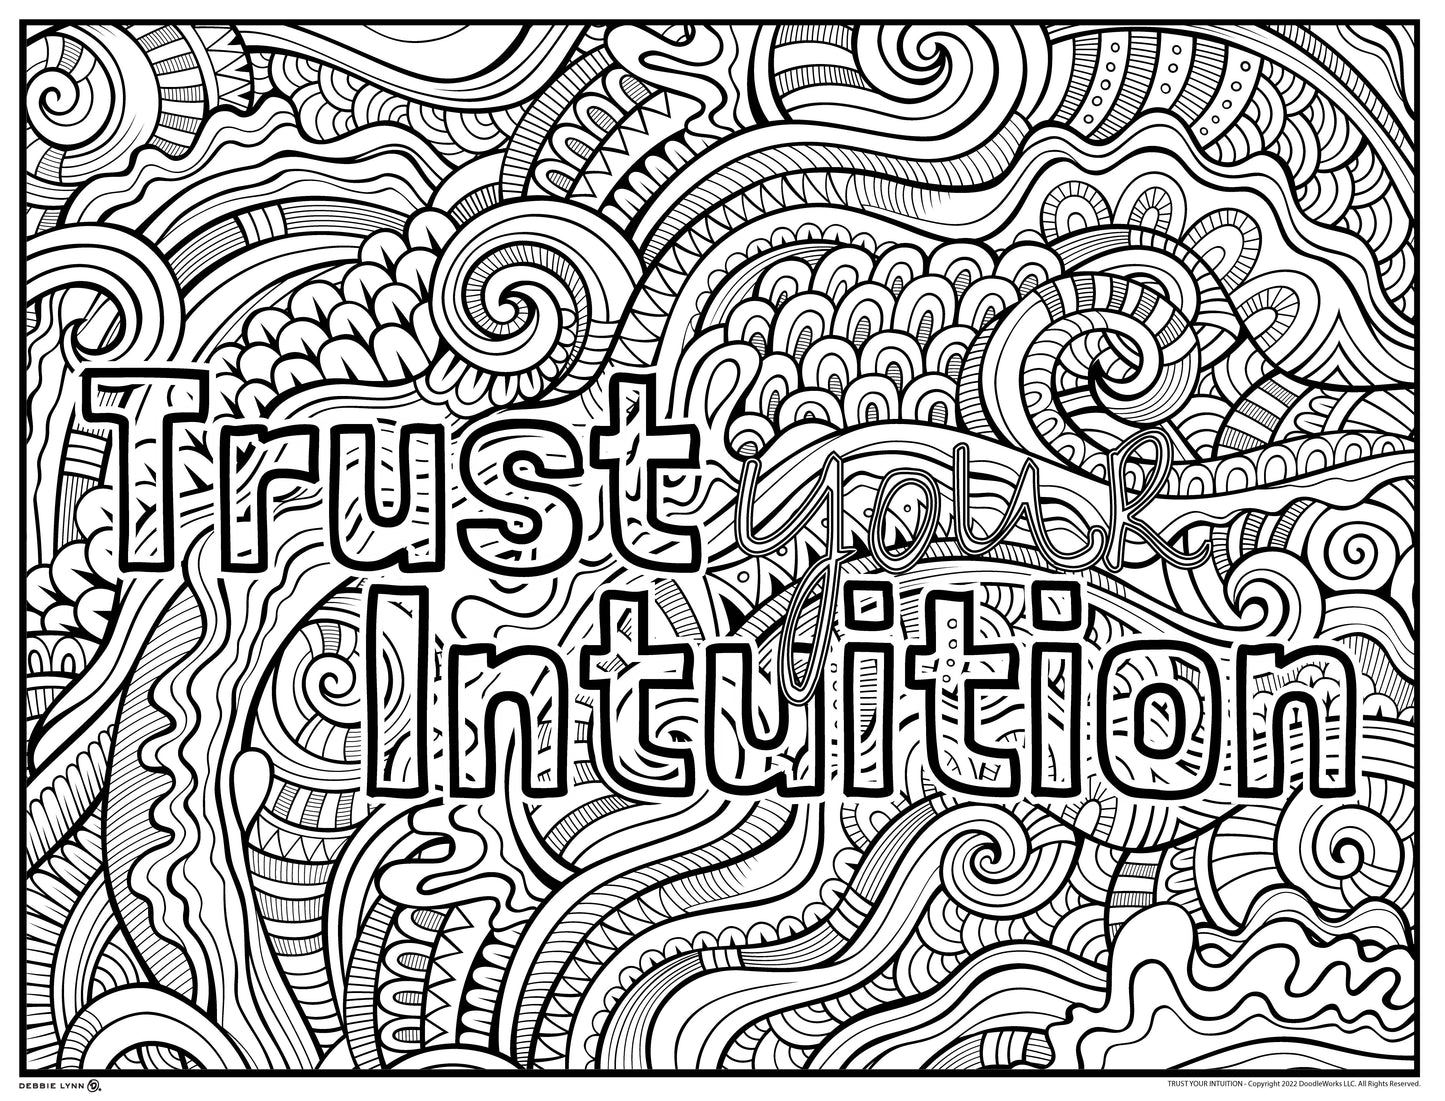 Trust Your Intuition Personalized Giant Coloring Poster 46"x60"